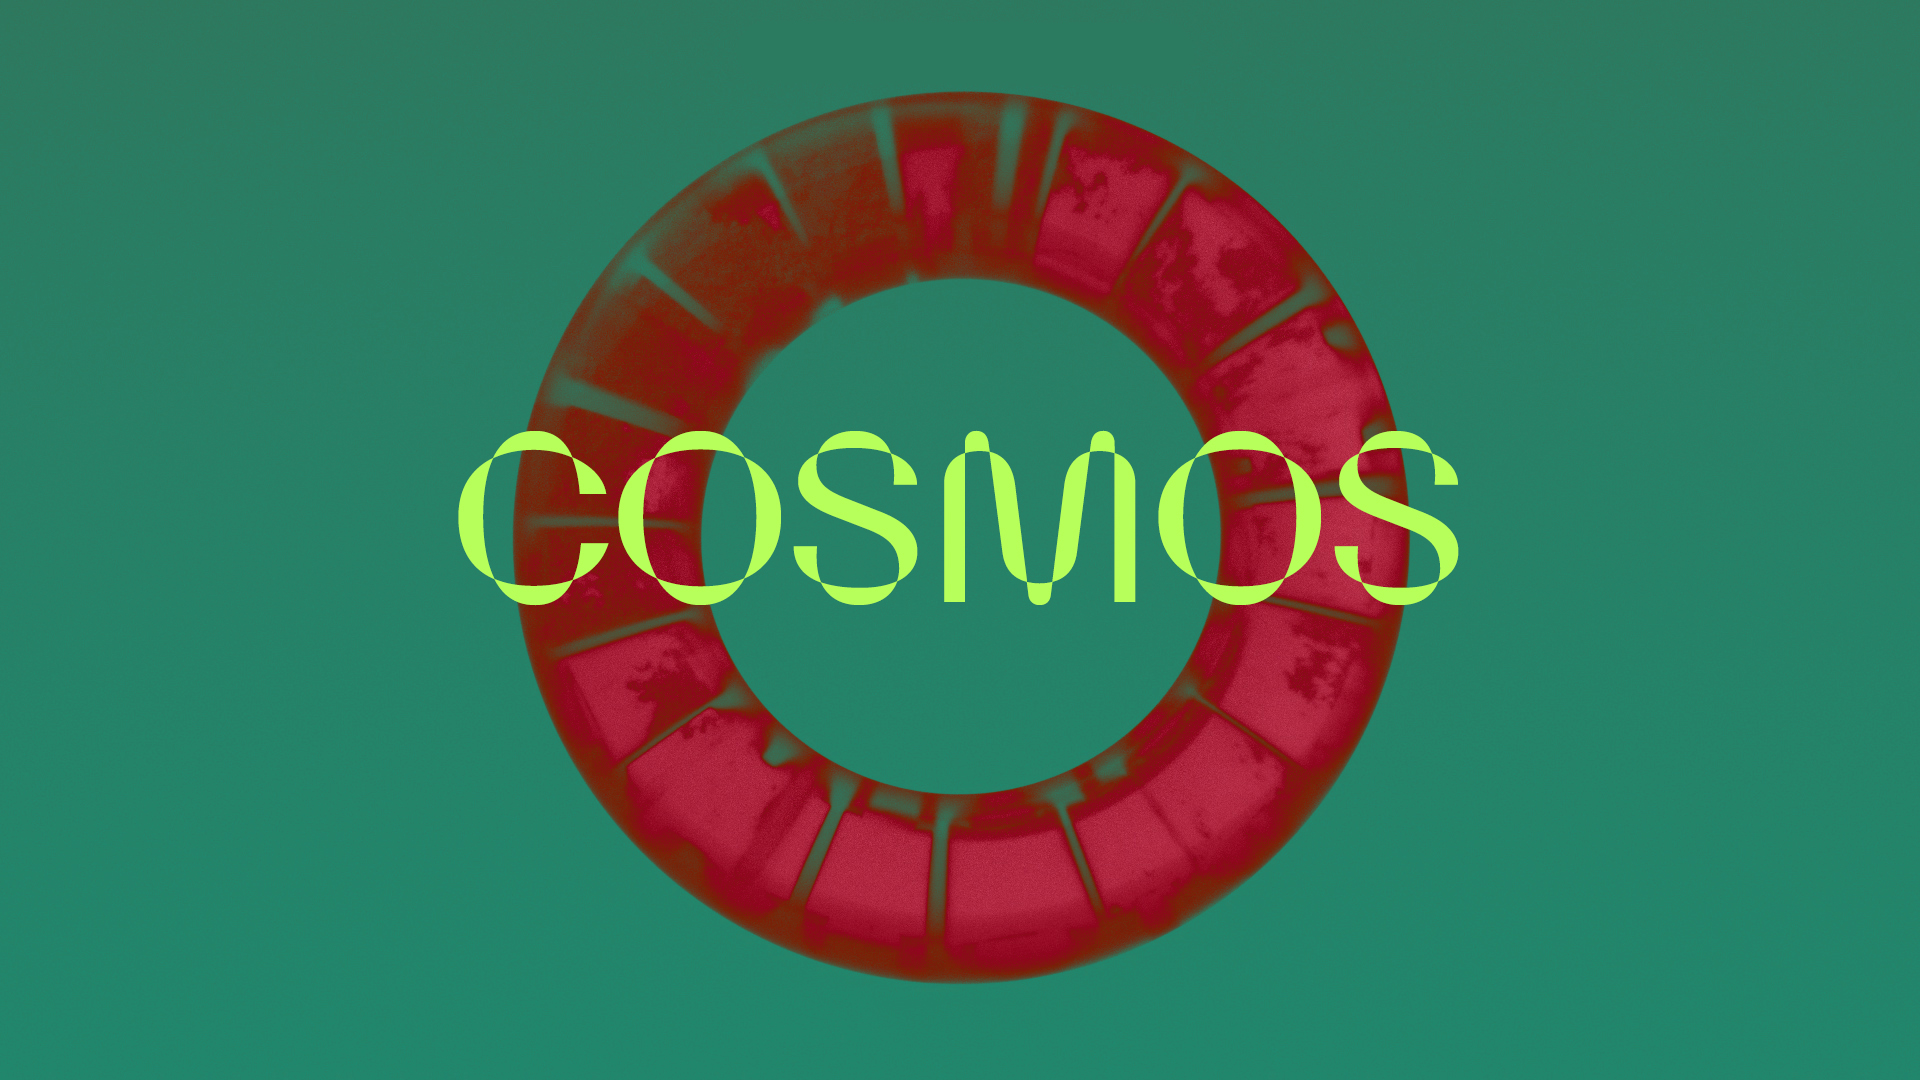 About COSMOS